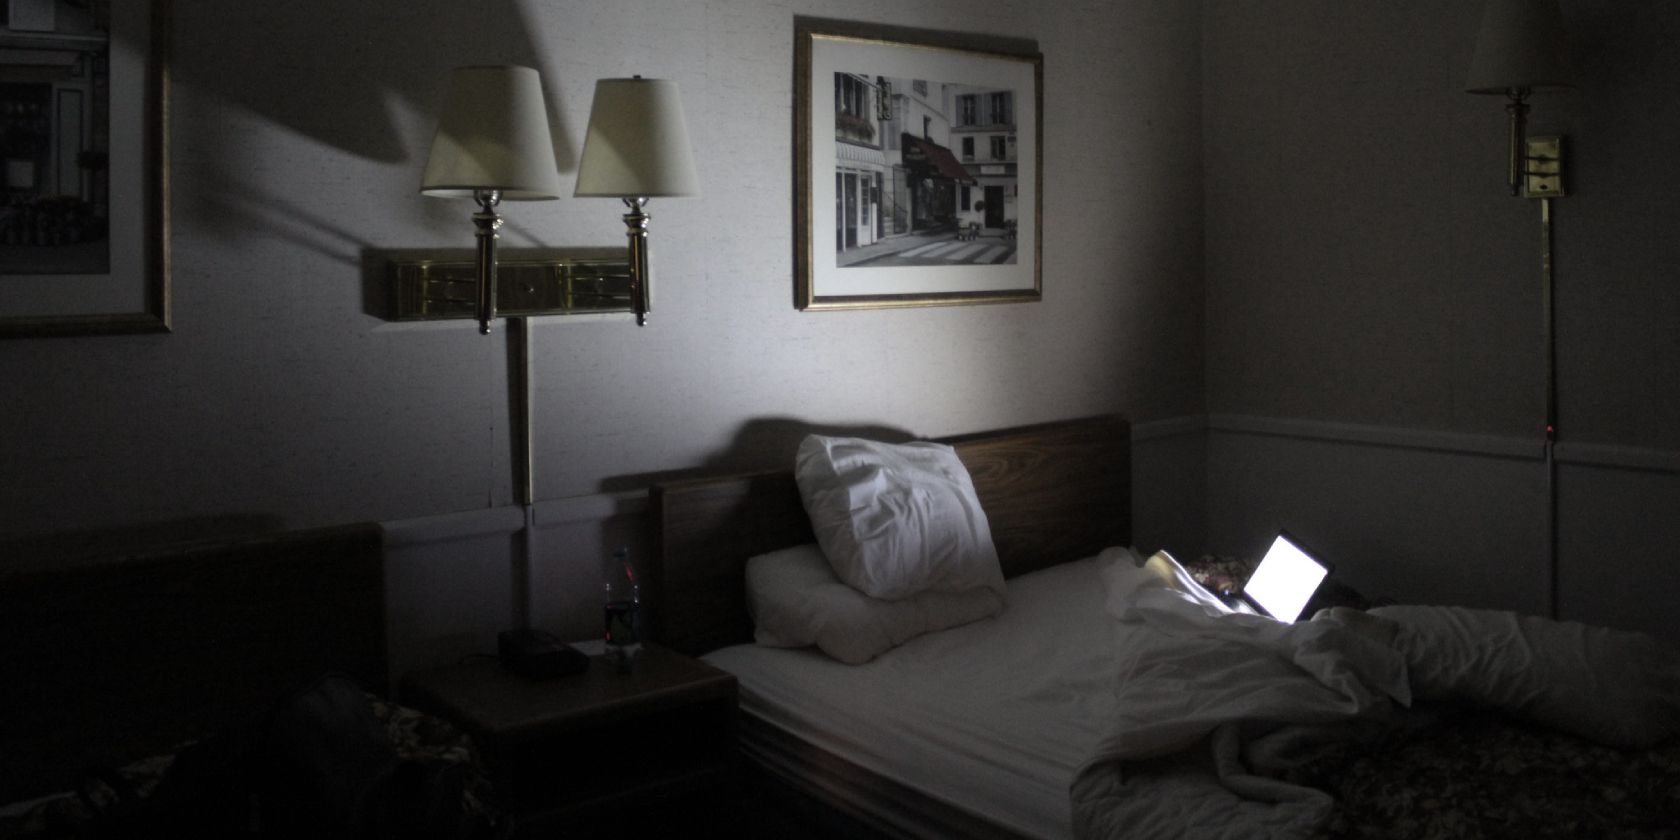 An open laptop on a bed illuminates an otherwise dark hotel room.